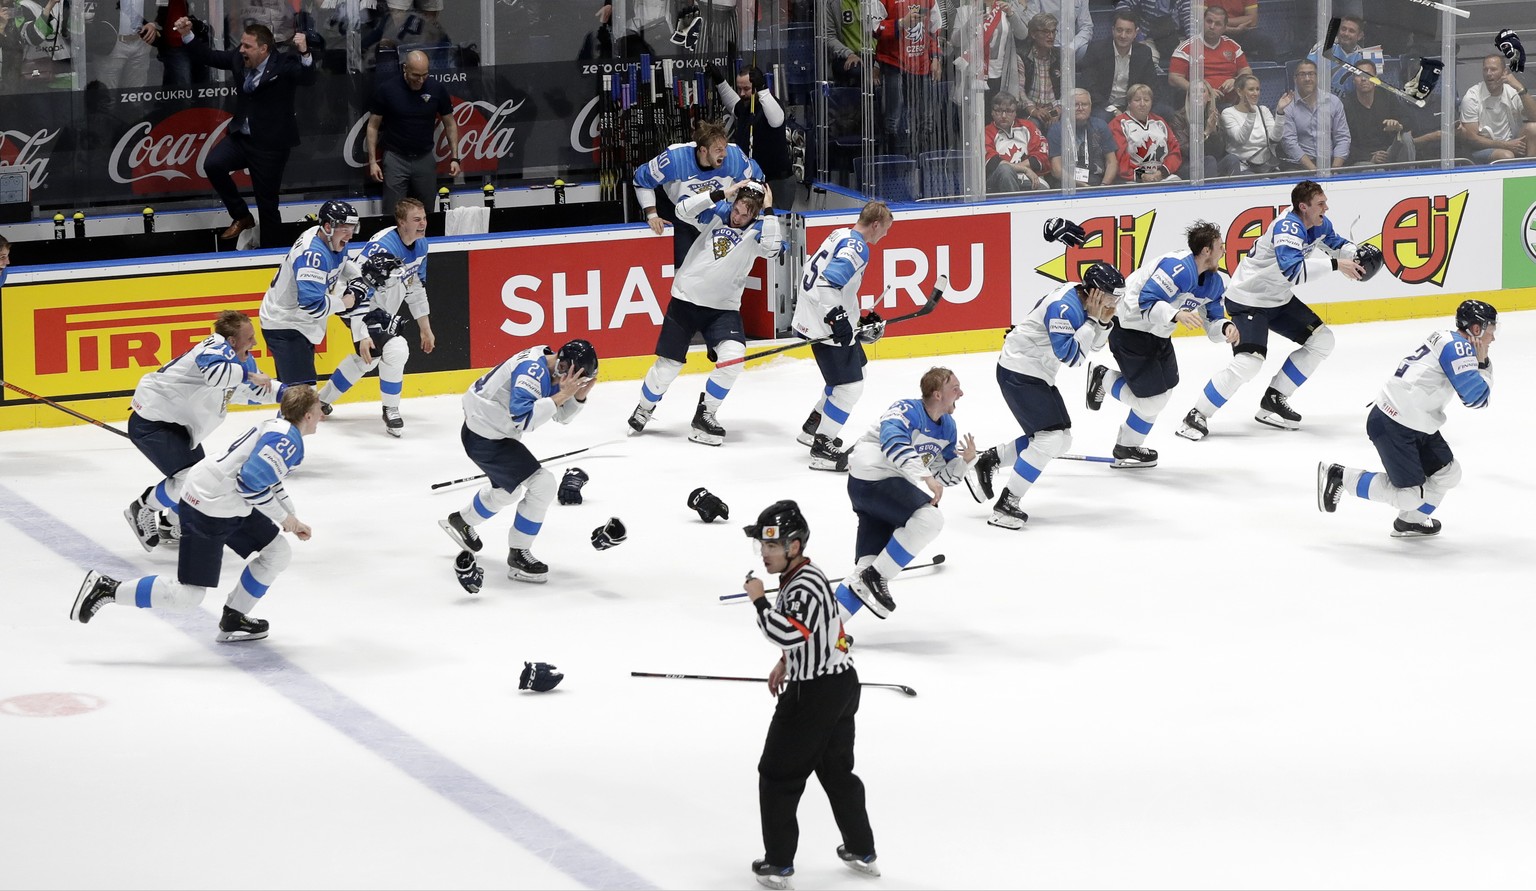 Finland players celebrate after beating Canada 3-1 in the Ice Hockey World Championships gold medal match at the Ondrej Nepela Arena in Bratislava, Slovakia, Sunday, May 26, 2019. (AP Photo/Petr David ...